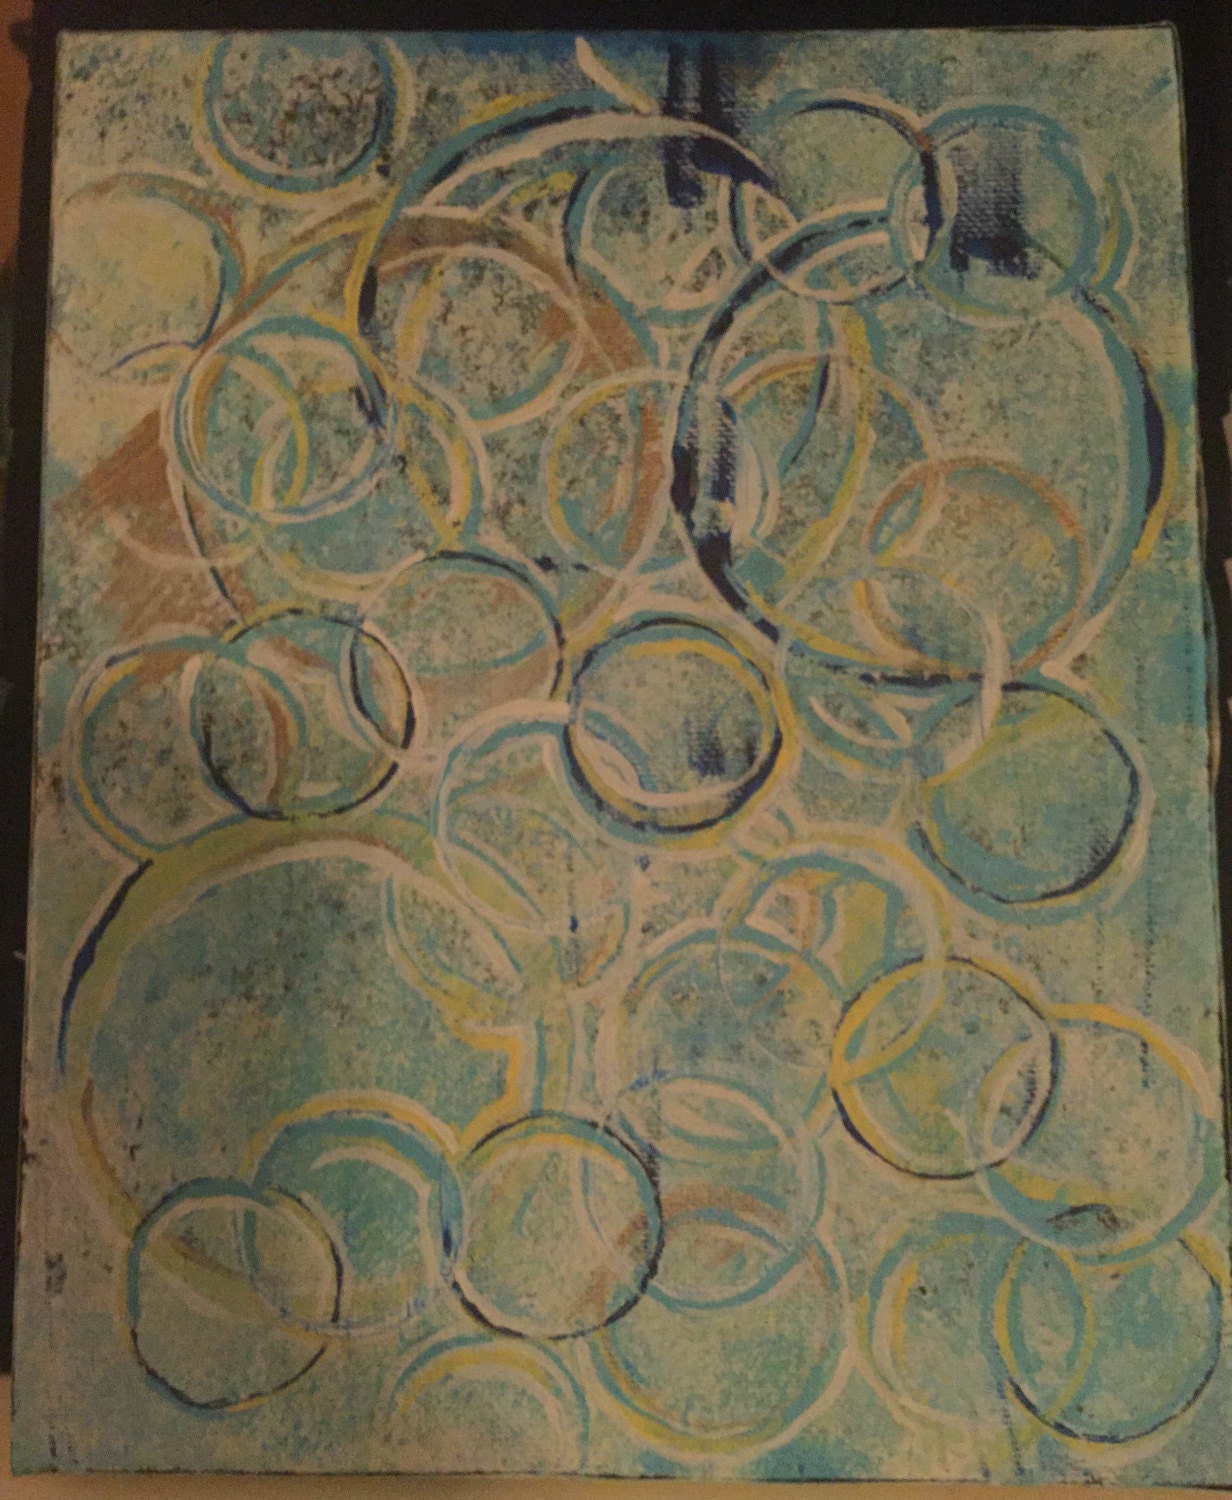 SALE Abstract acrylic circles by KellyKirstieArtworks on Etsy